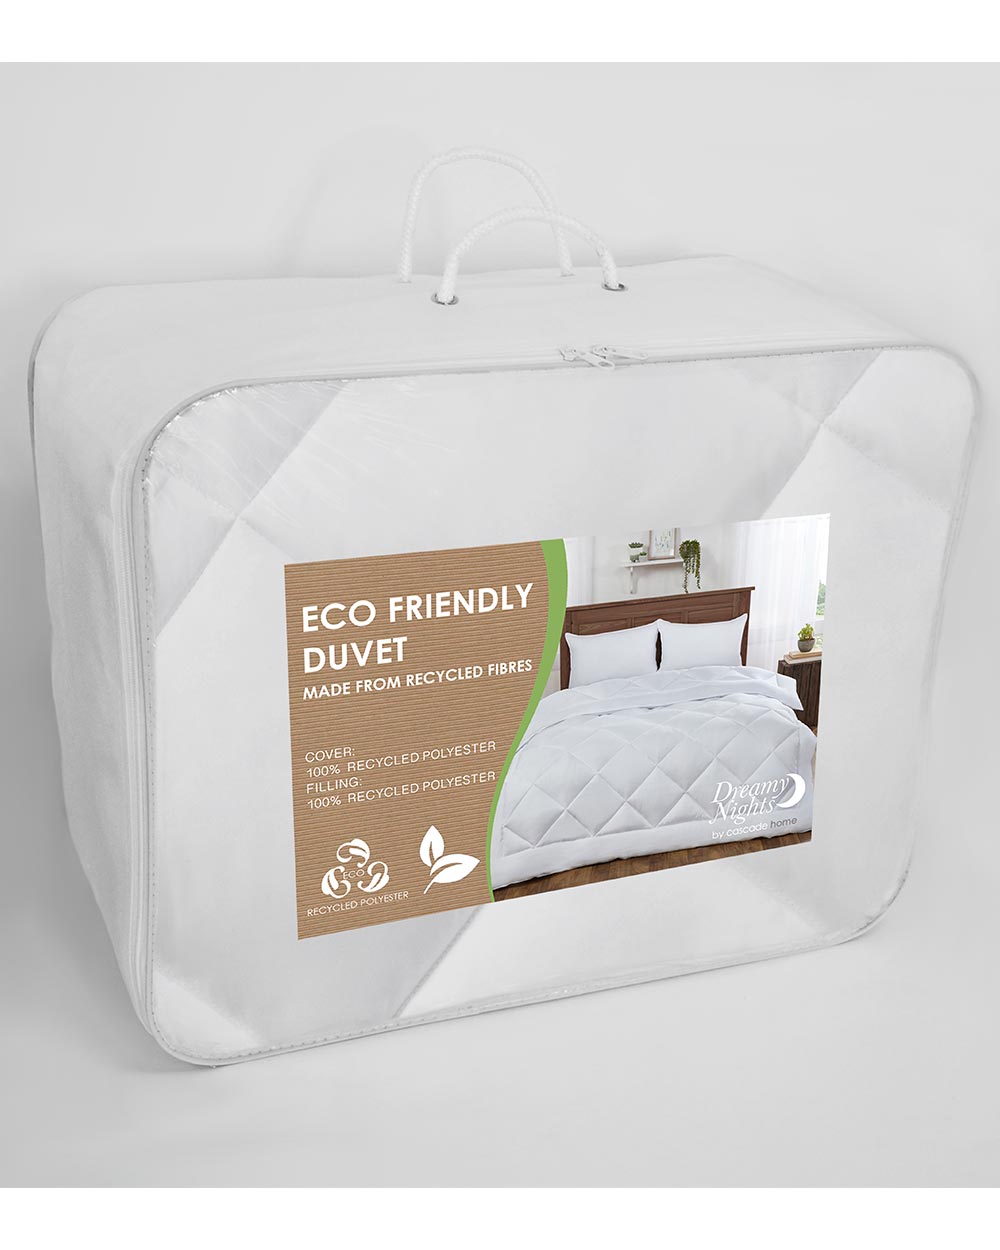 Everybody deserves a great night's sleep, this Eco Friendly Single Duvet 10.5 Tog provides that cosy feeling helping you sleep soundly.   This single duvet fits any standard size single bed comfortably. Measuring 135 cm x 200 cm this single duvet gives just the right amount of drape for maximum comfort.   A medium 10.5 Tog duvet is ideal in spring and autumn. Perfect if you are sensitive to changing temperatures, or if you get too hot and stuffy in the thickest tog.